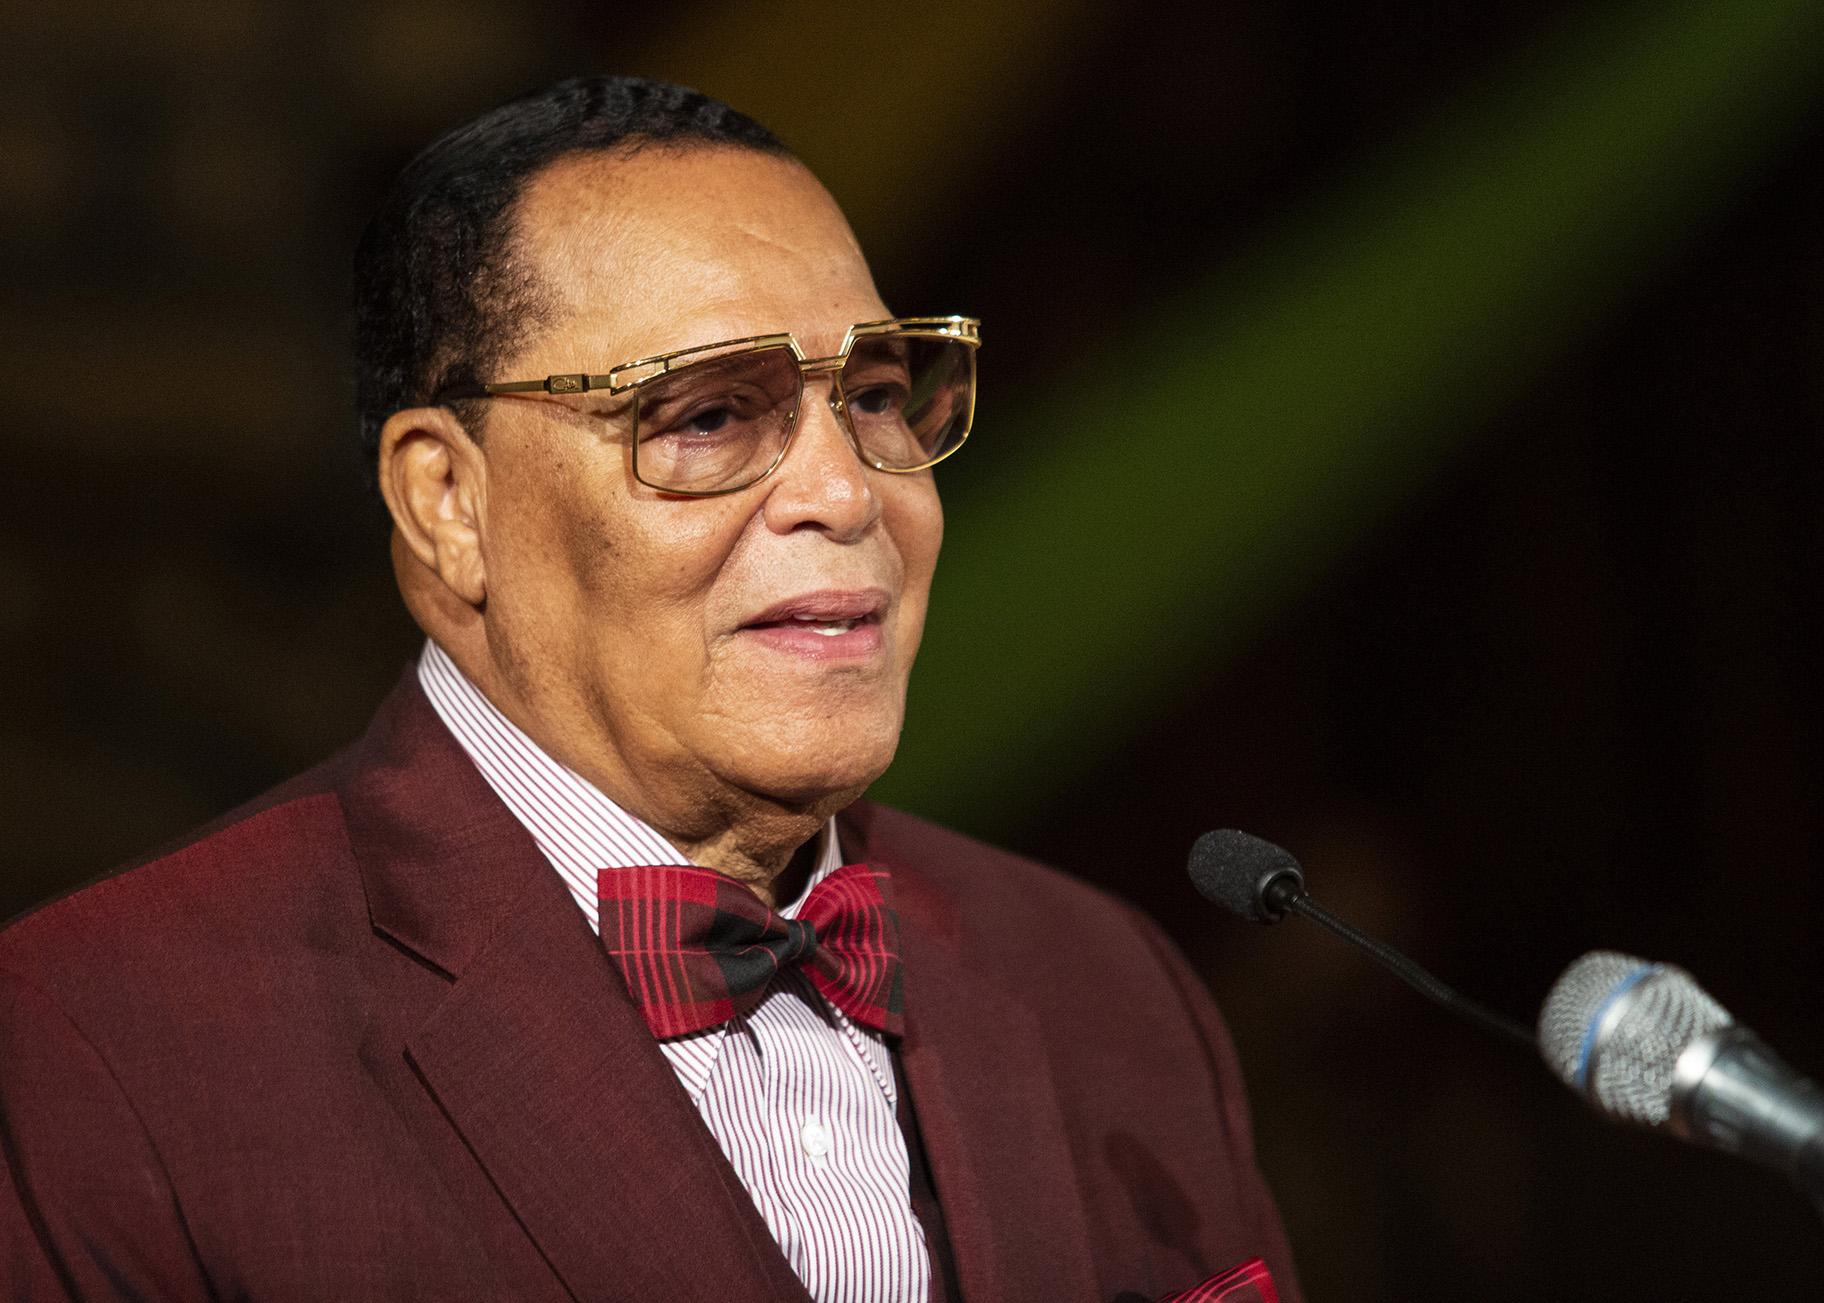 Controversial Minister Louis Farrakhan Speaks at St. Sabina Chicago